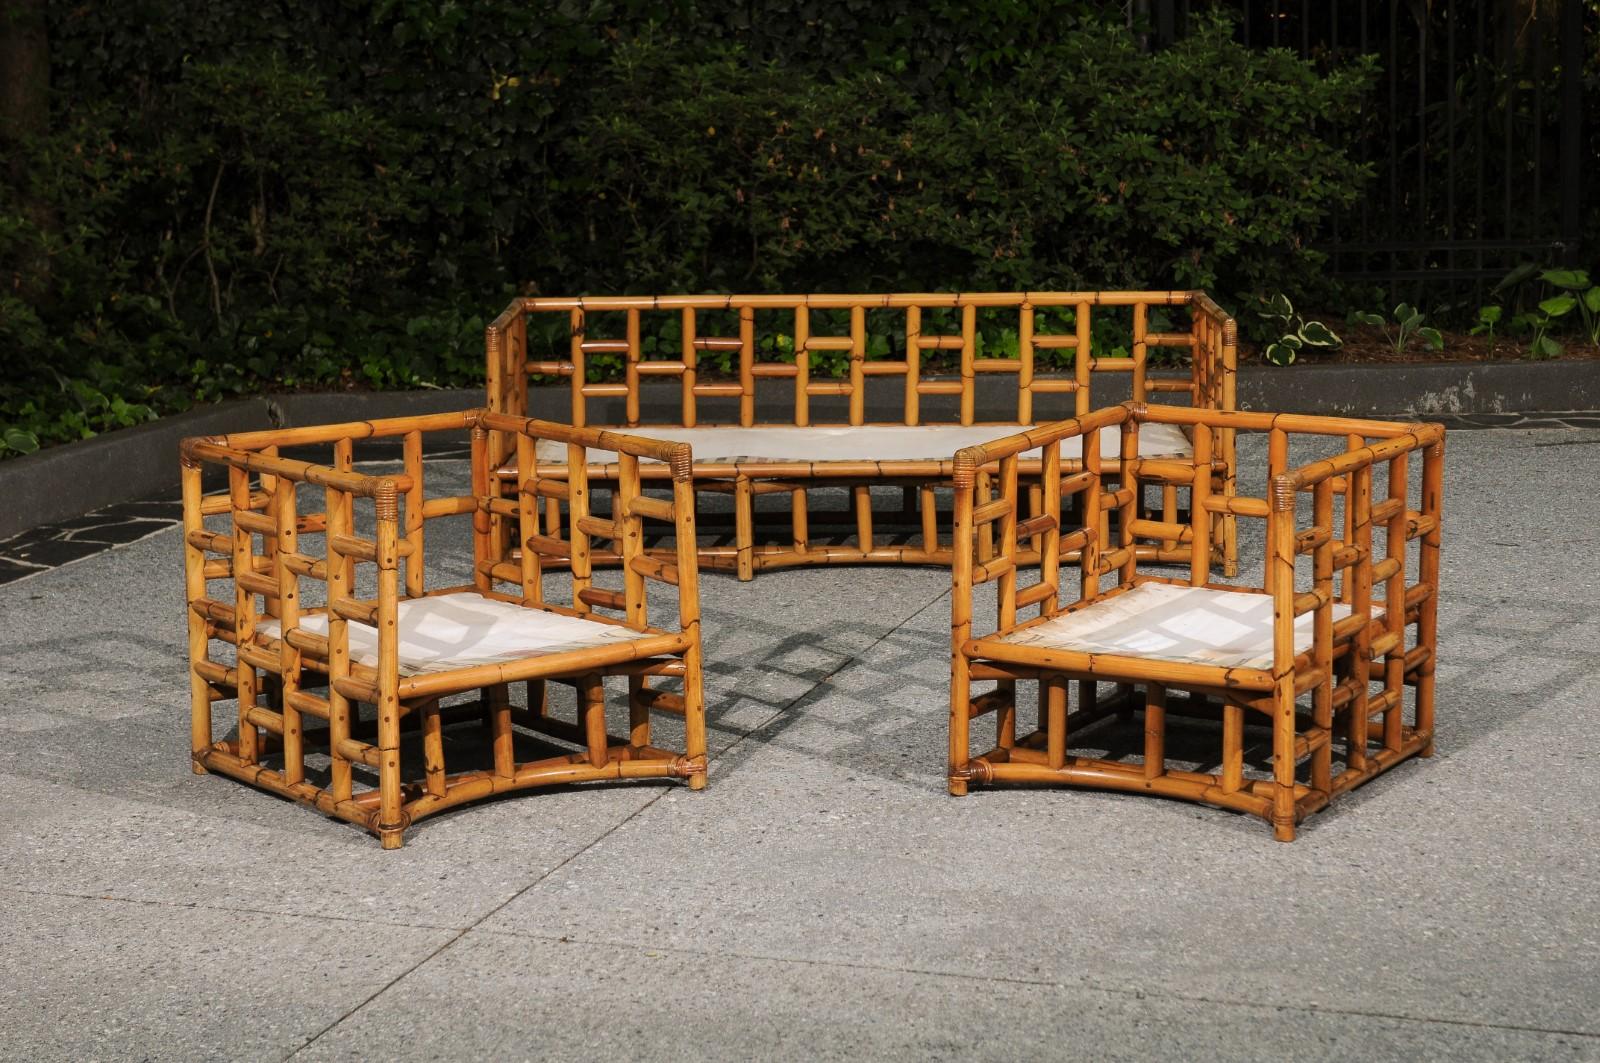 These magnificent frames are shipped as professionally photographed and described in the listing narrative: Meticulously professionally restored and ready for upholstery. Expert custom upholstery service is available.

An incredible, beyond